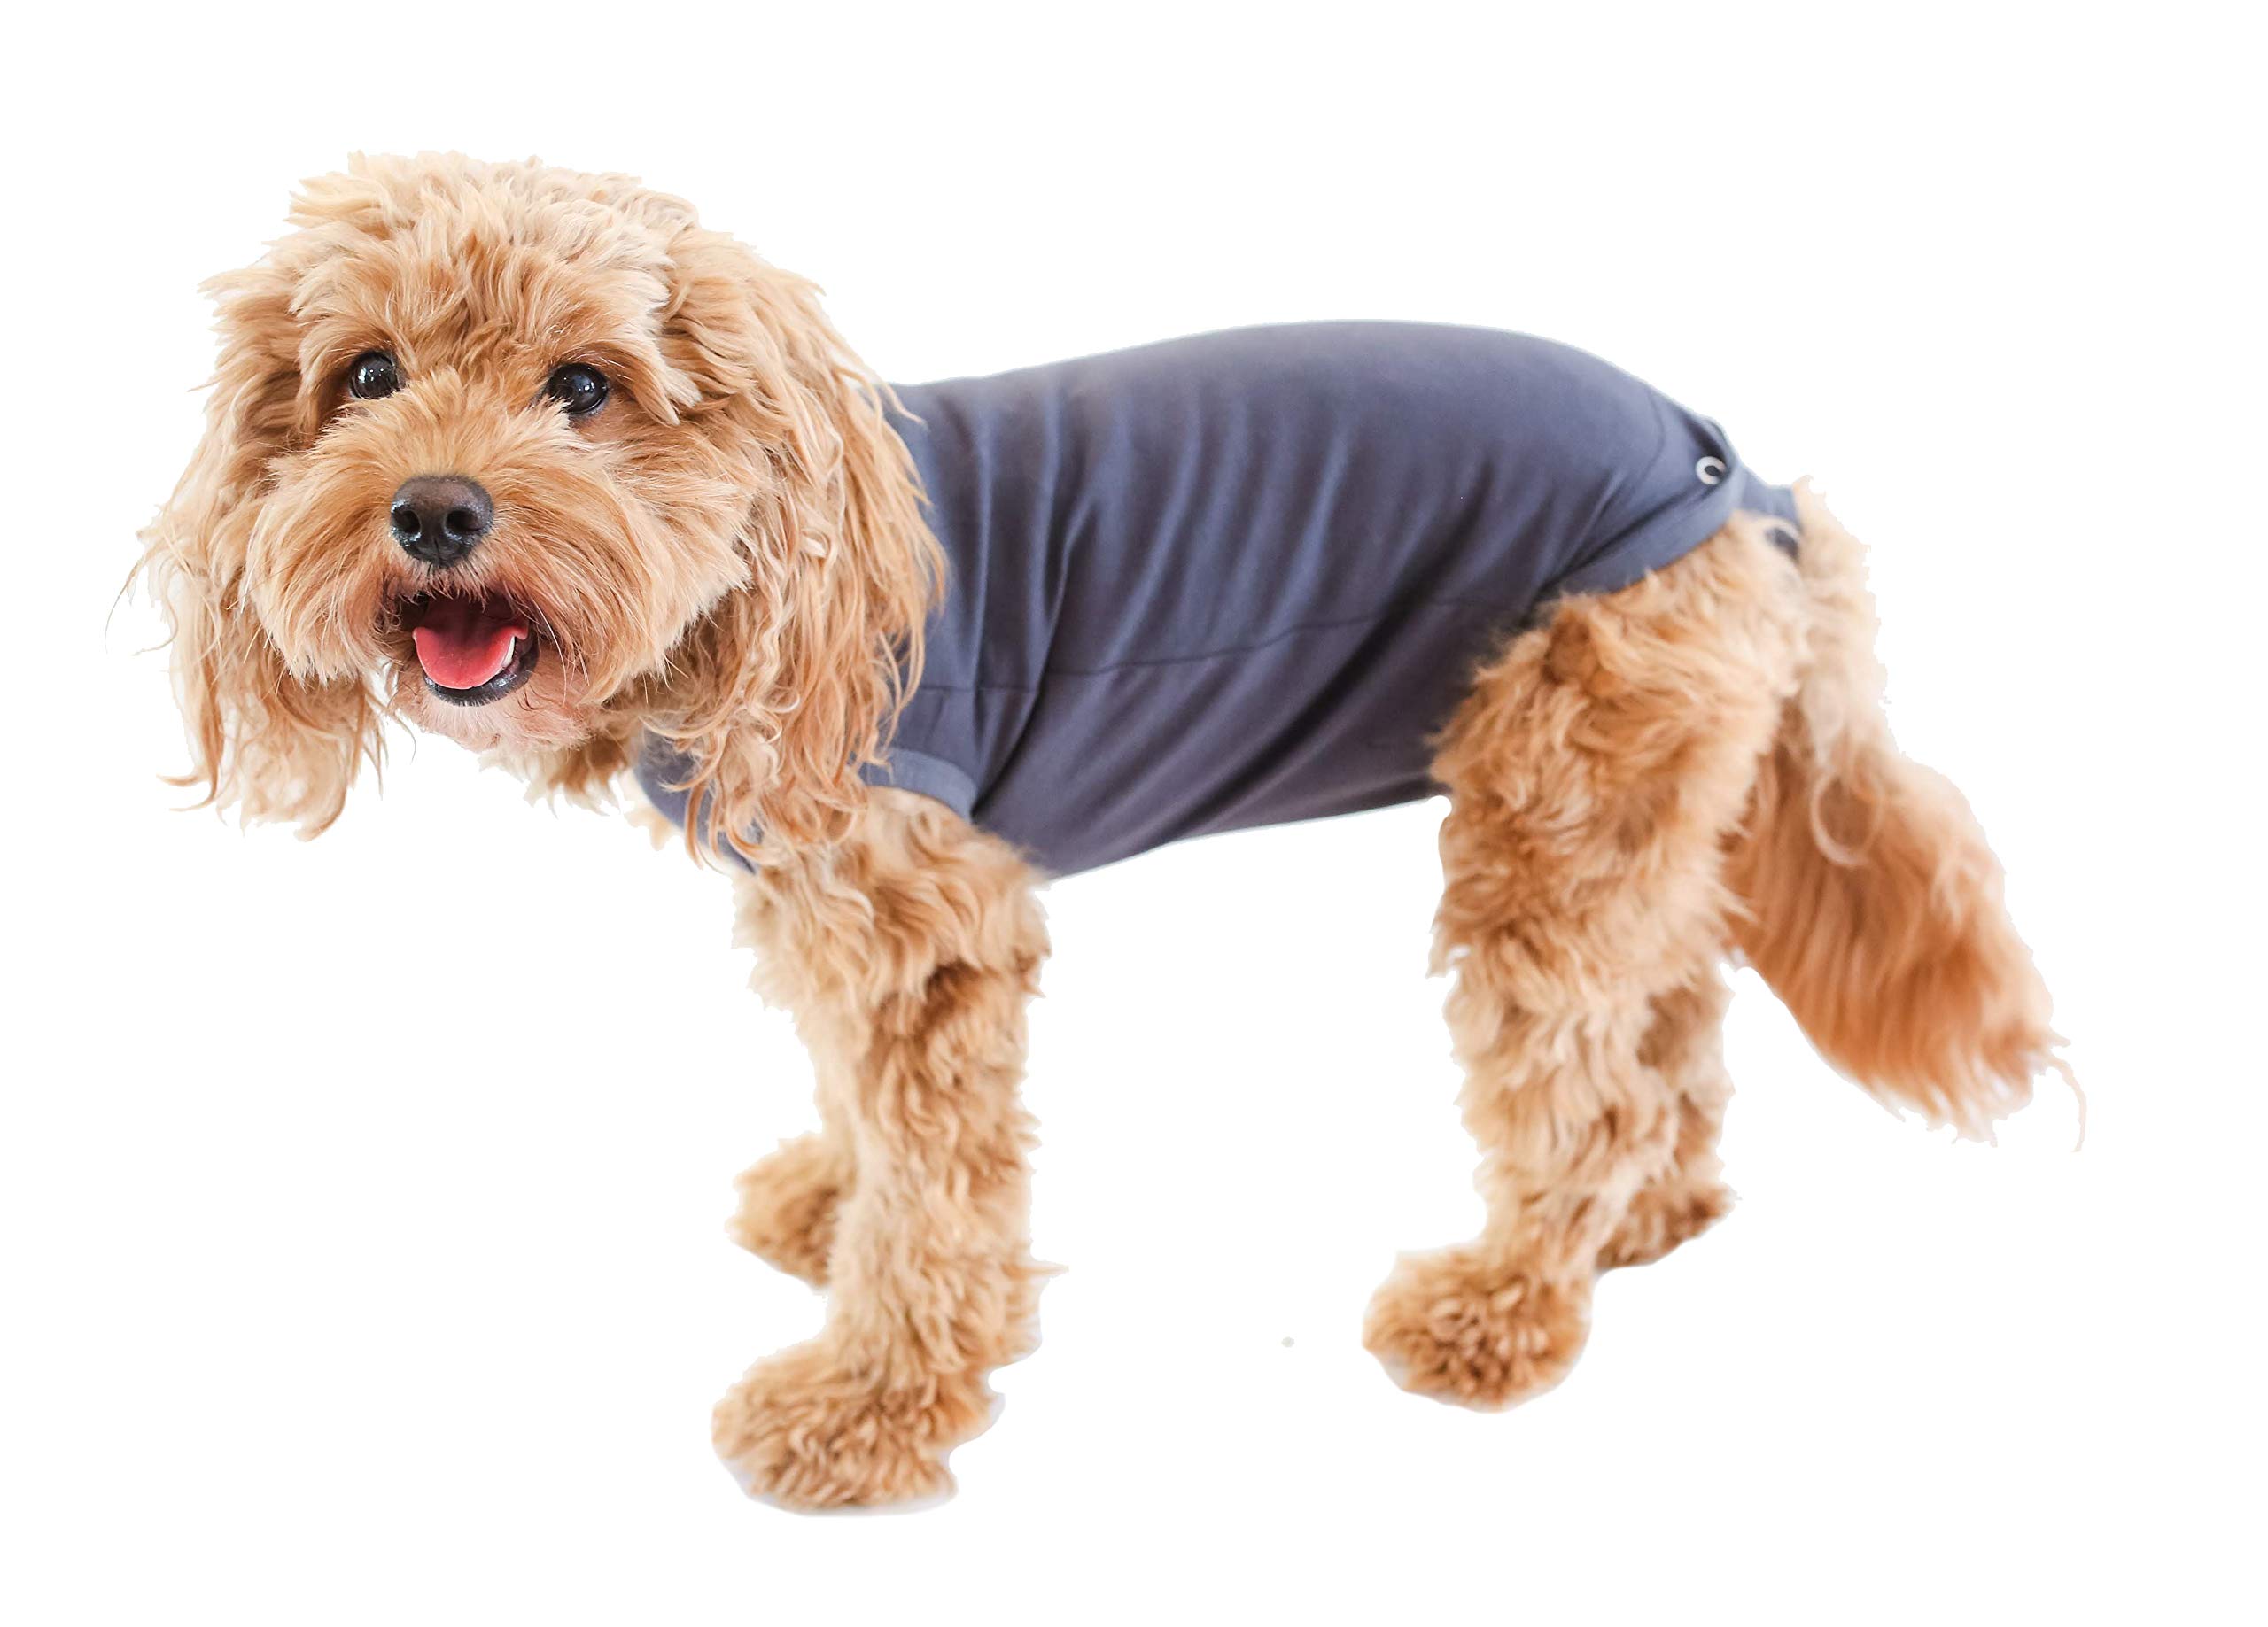 Bellyguard - After Surgery Dog Recovery Onesie Post Spay Neuter Body Suit for Male and Female Dogs comfortable cone Alternative